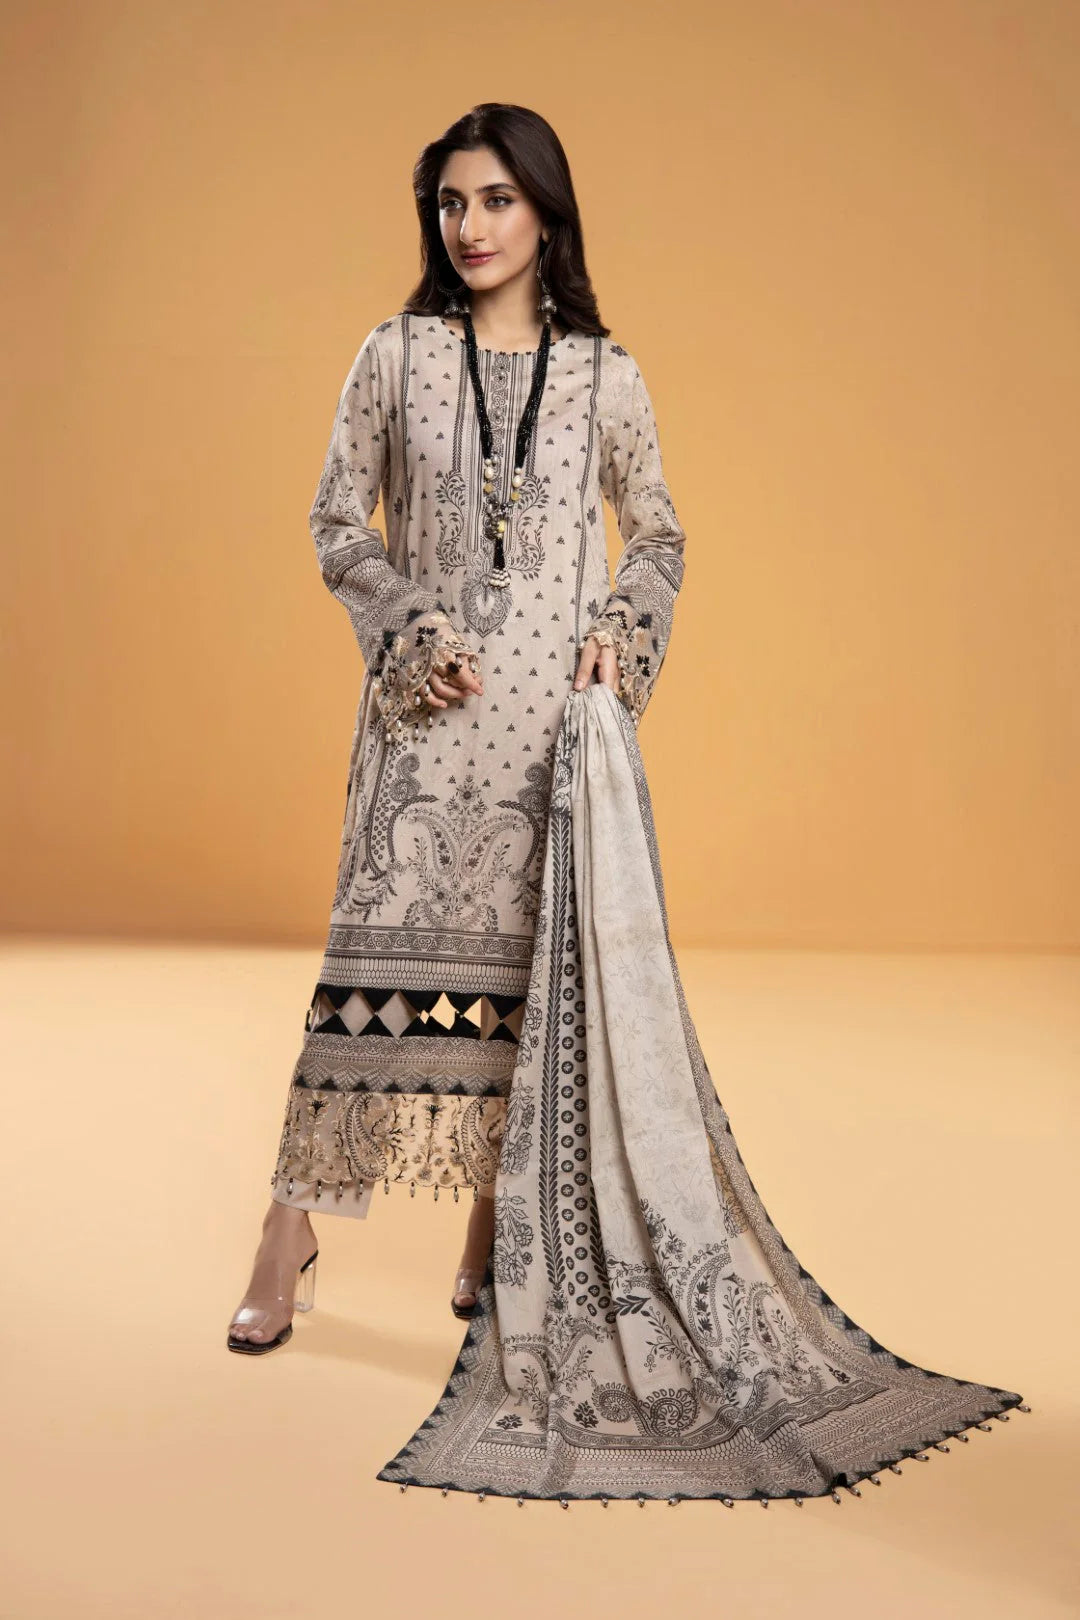 MI Creation by DR. Haris - MARIA Stitched 3 Piece Digital Printed Lawn Suit MAR-001 - Summer Collection